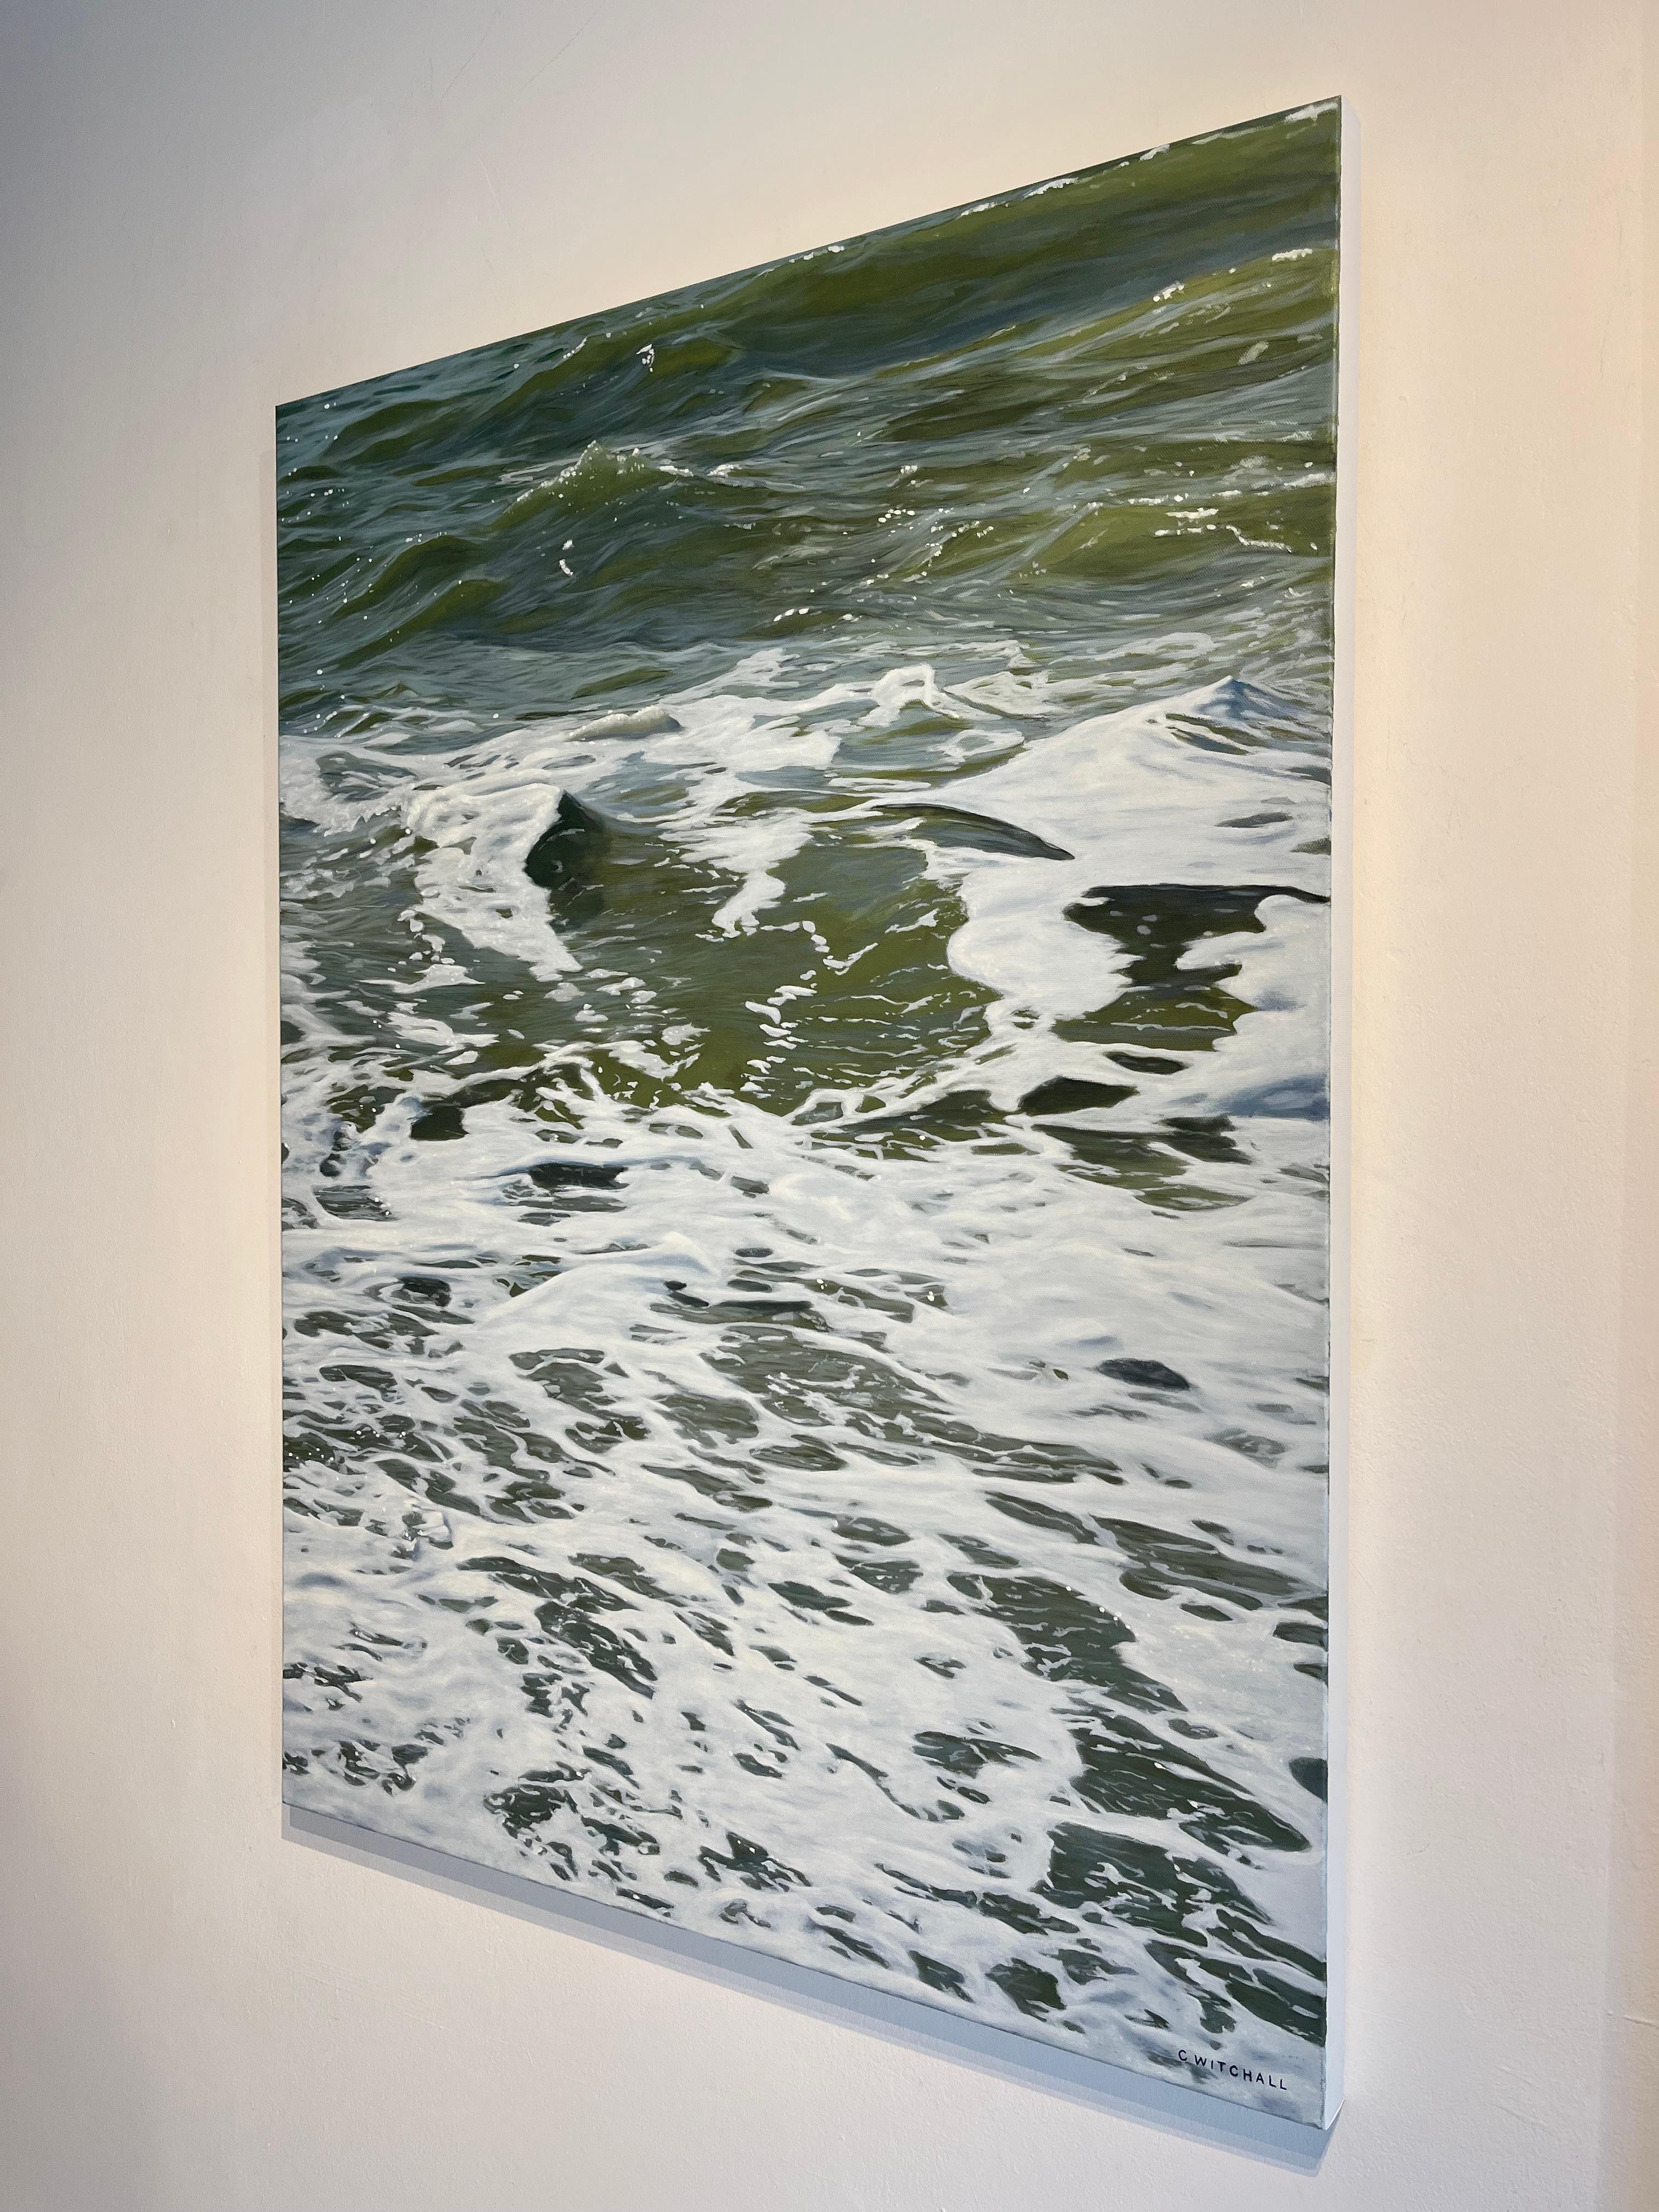 Lullaby-original modern Hyper realism seascape oil painting-contemporary Art - Photorealist Painting by Christopher Witchall